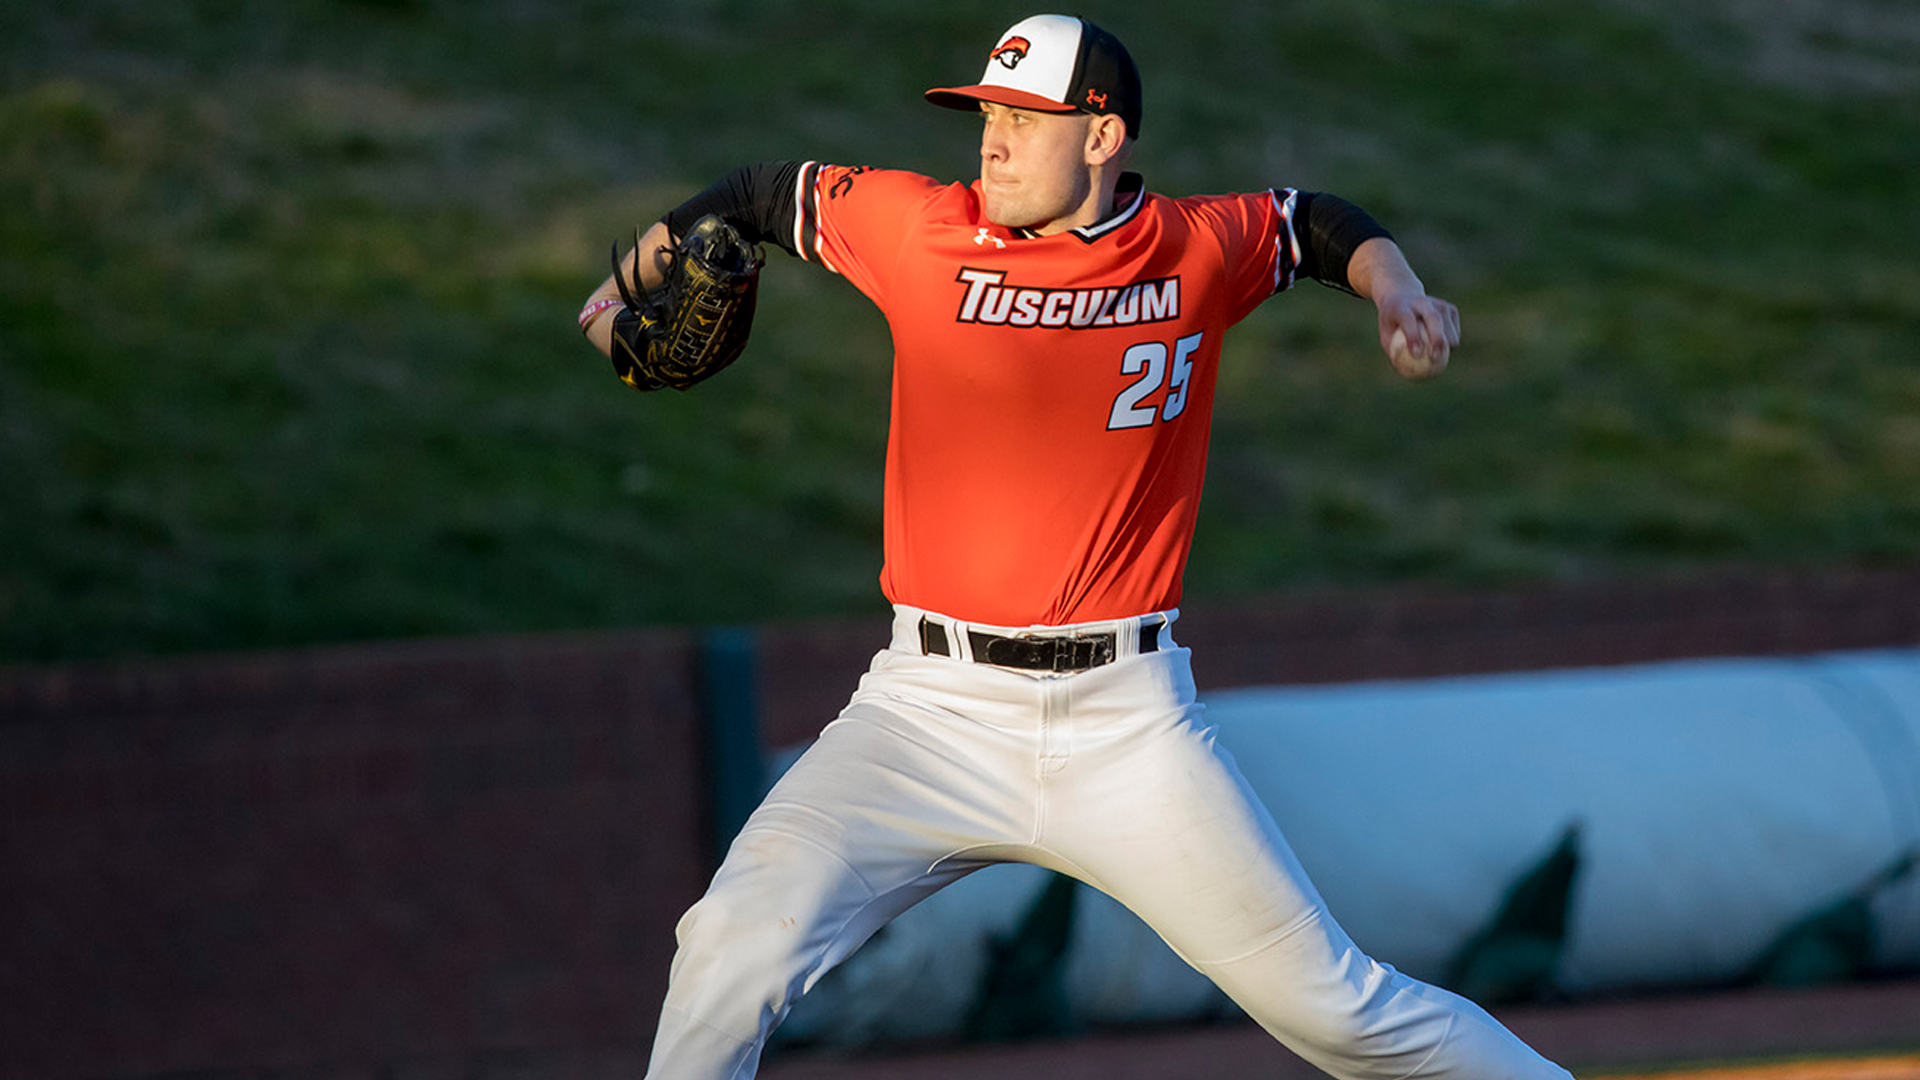 Mitch McCain recorded a career-best 10 strikeouts in Tusculum's 16-7 win over Indianapolis (photo by Chuck Williams)